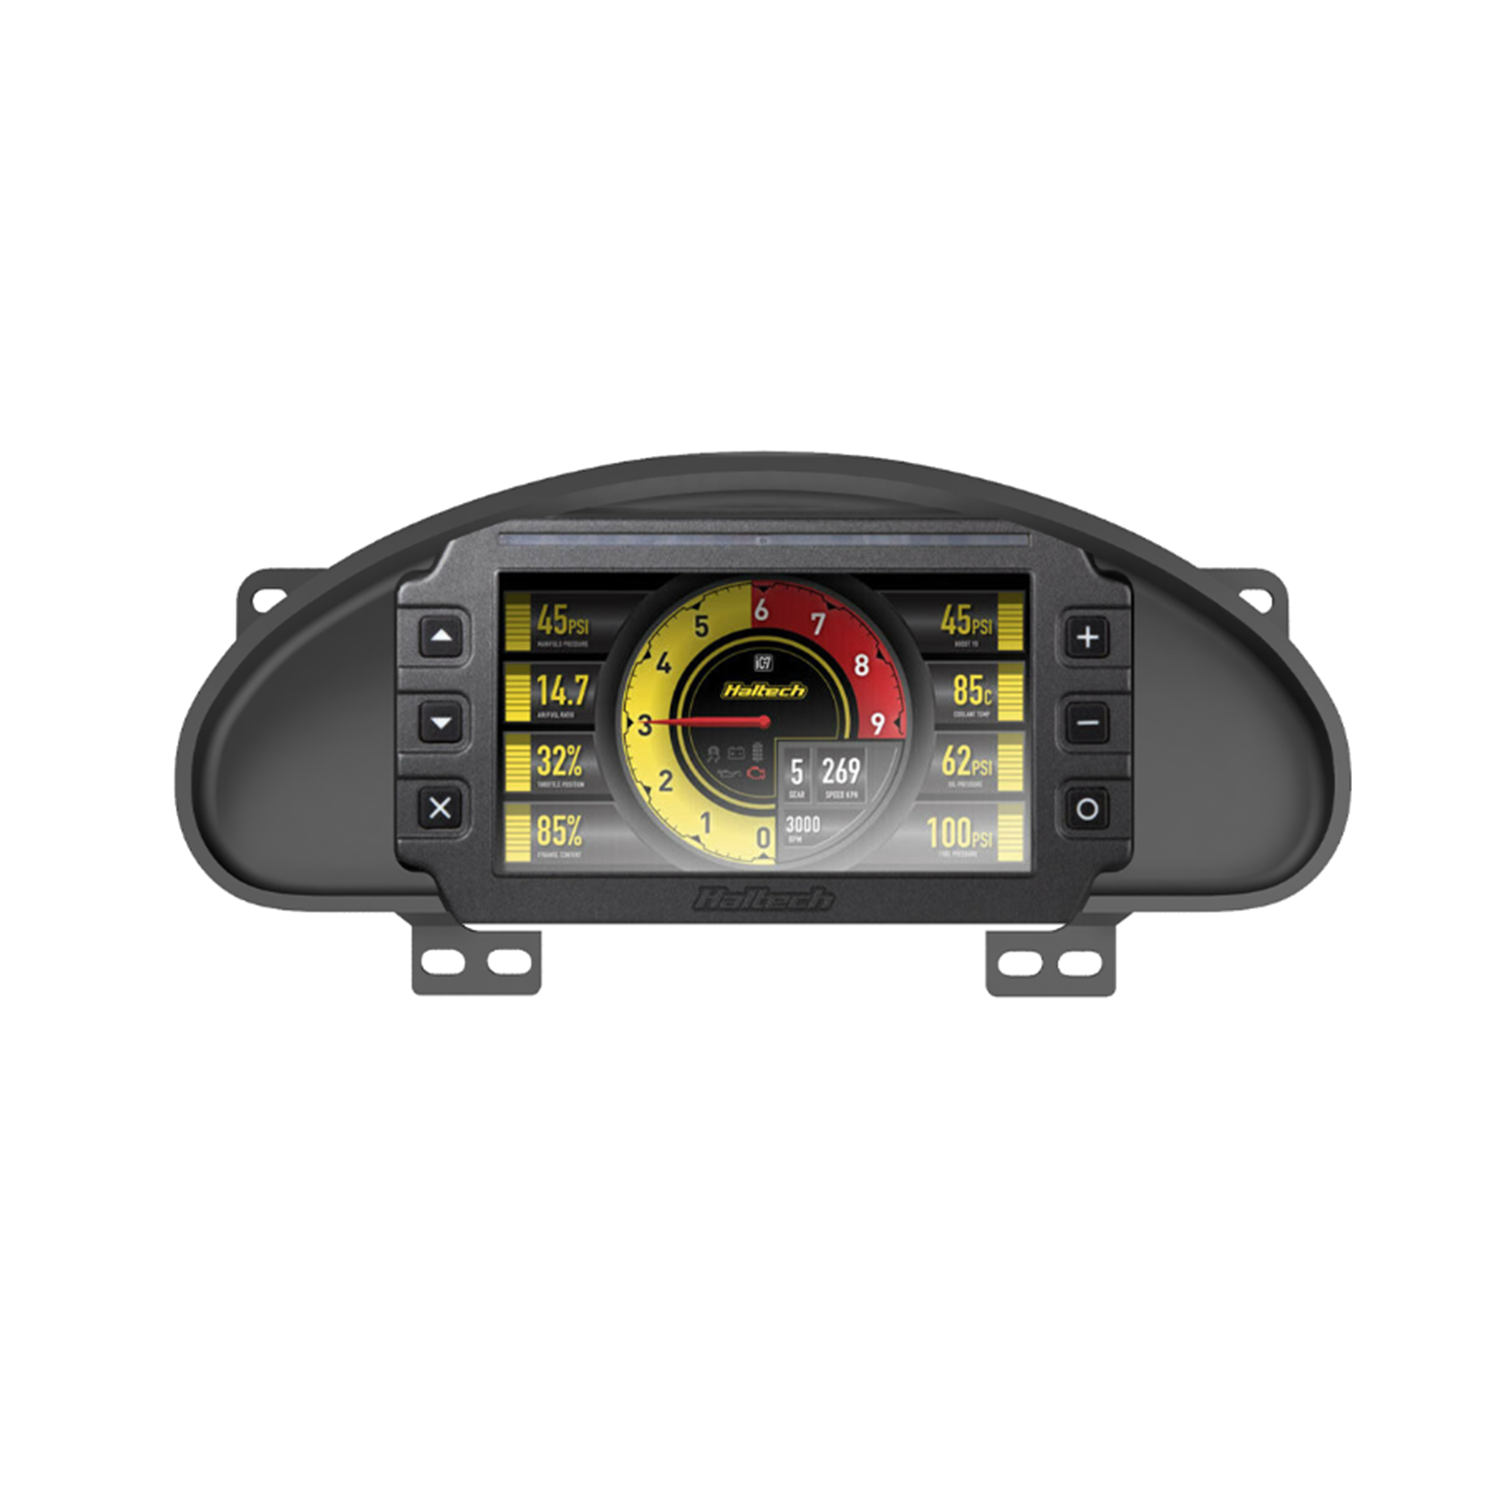 Mazda MX-5 Miata NA NB Dash Mount Recessed for the Haltech iC-7 (display not included)